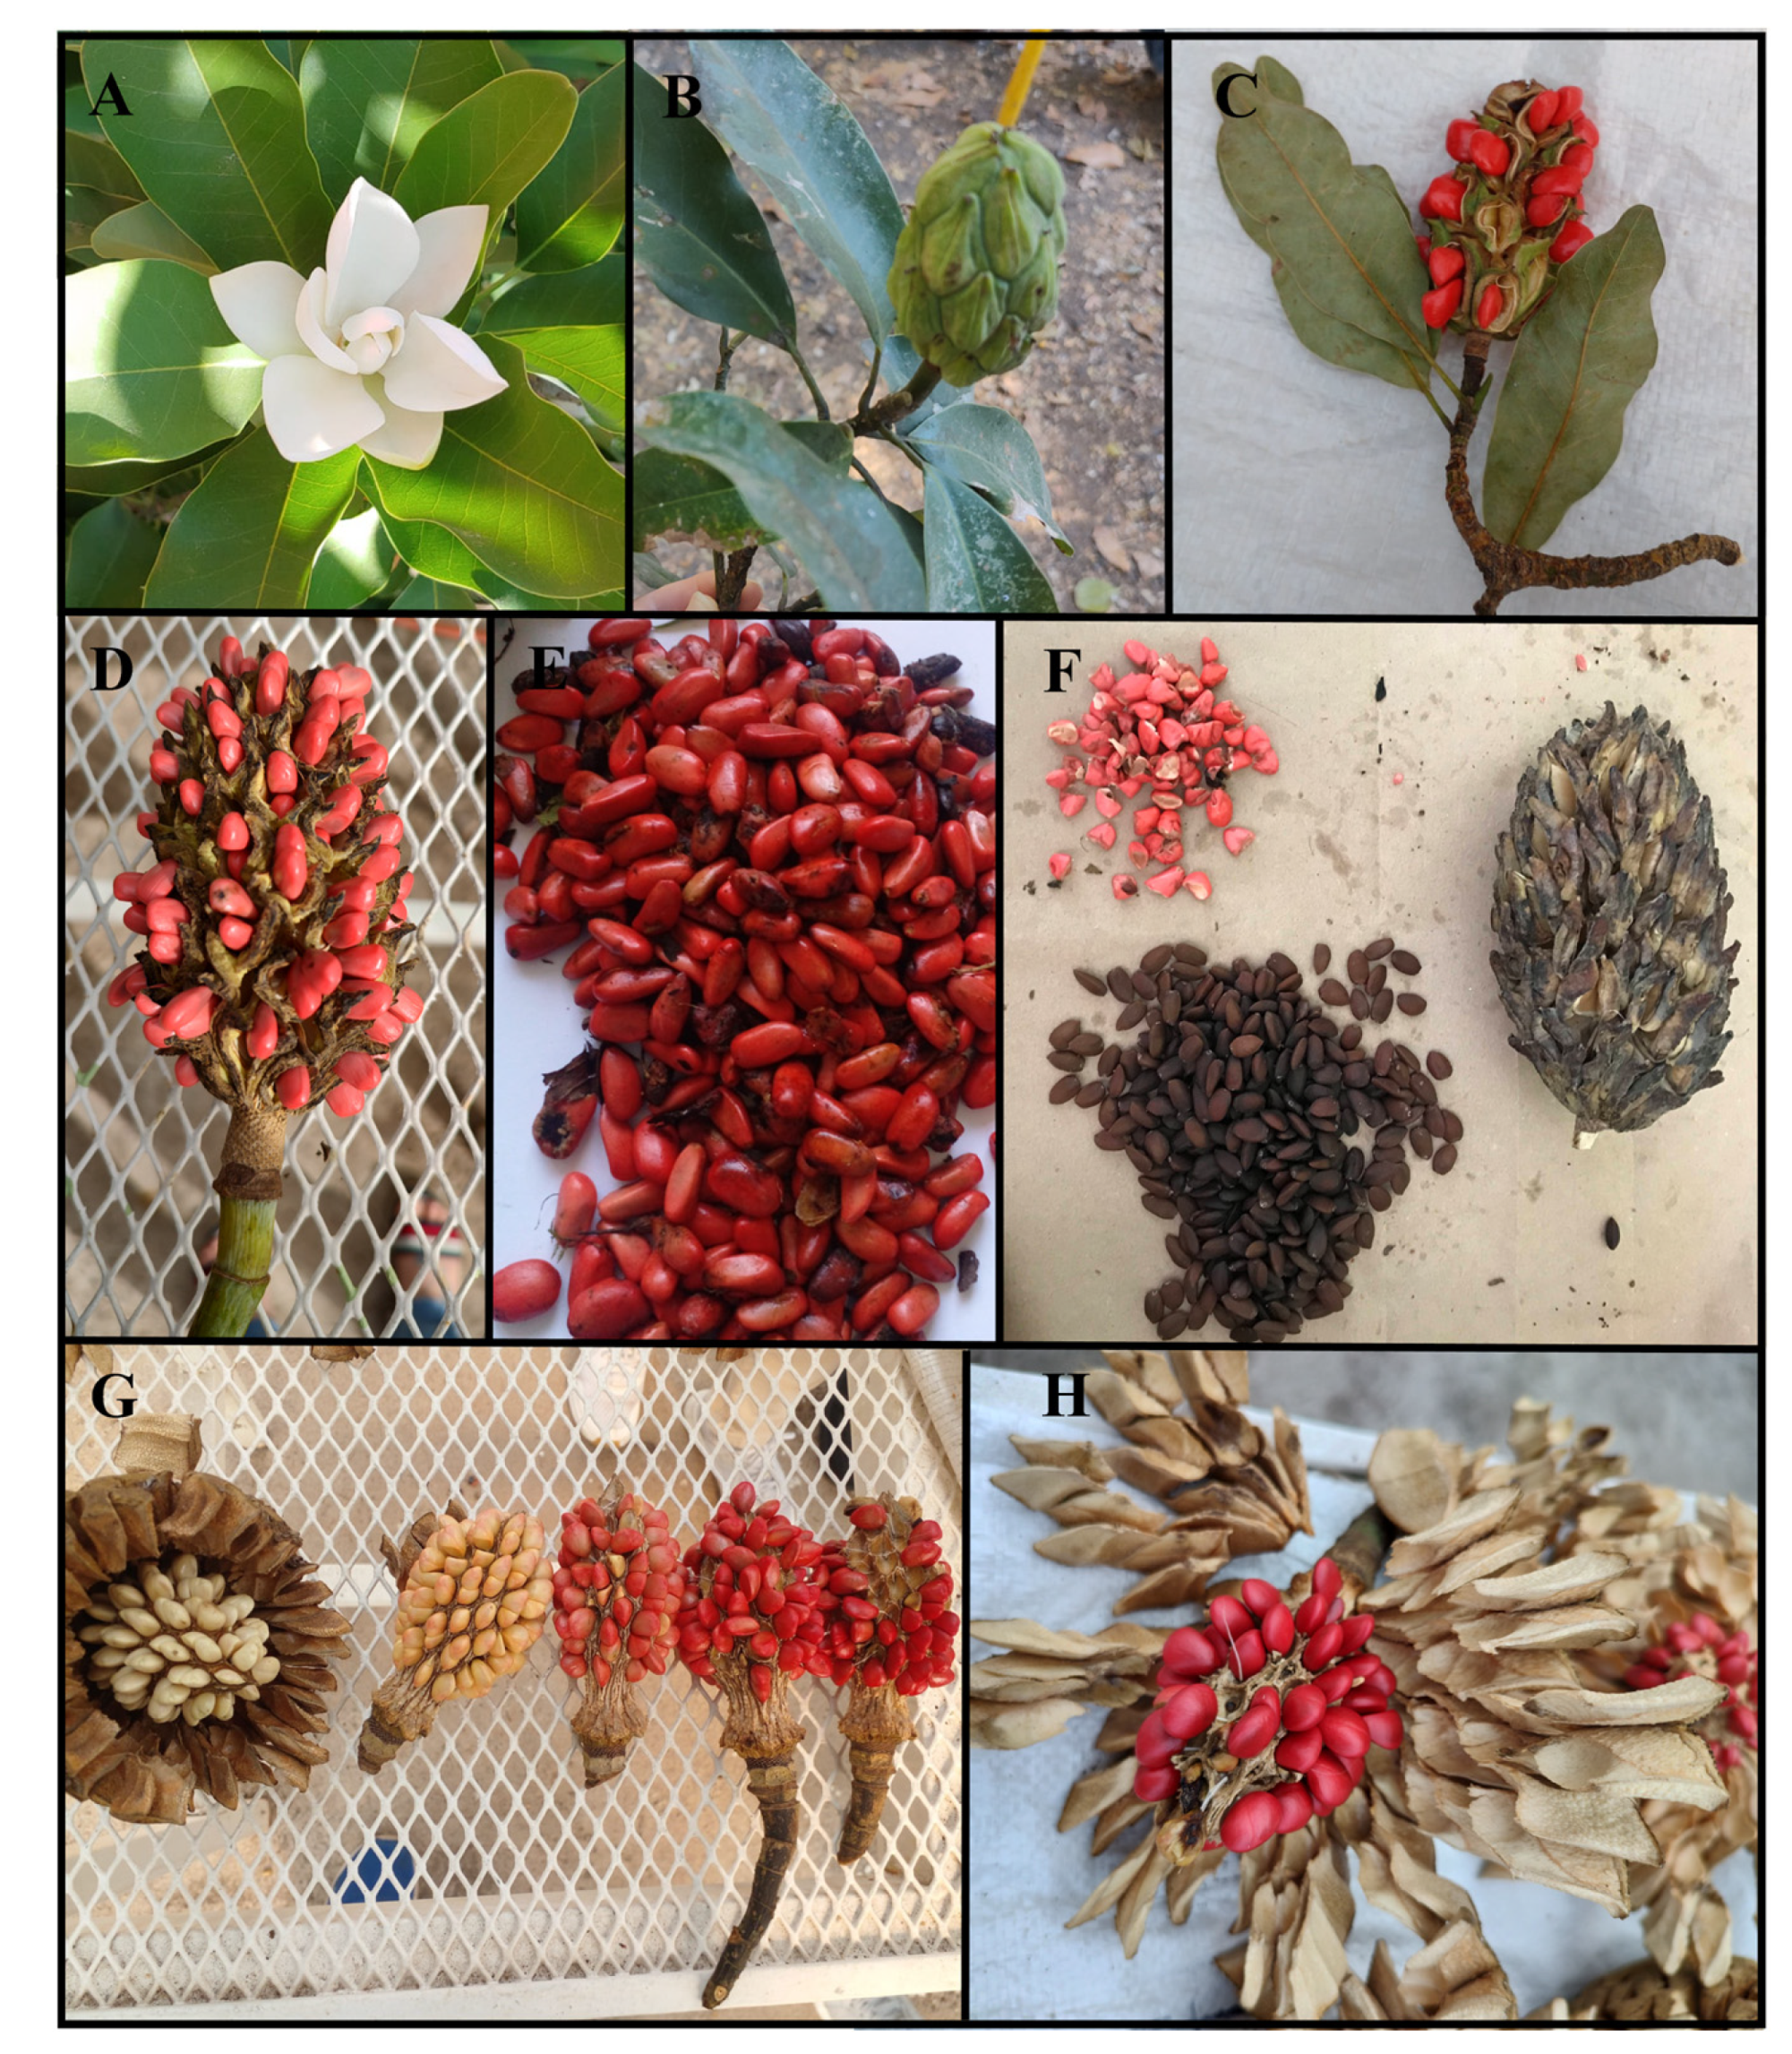 Molecules | Free Full-Text | The Potential of Magnolia spp. in the 